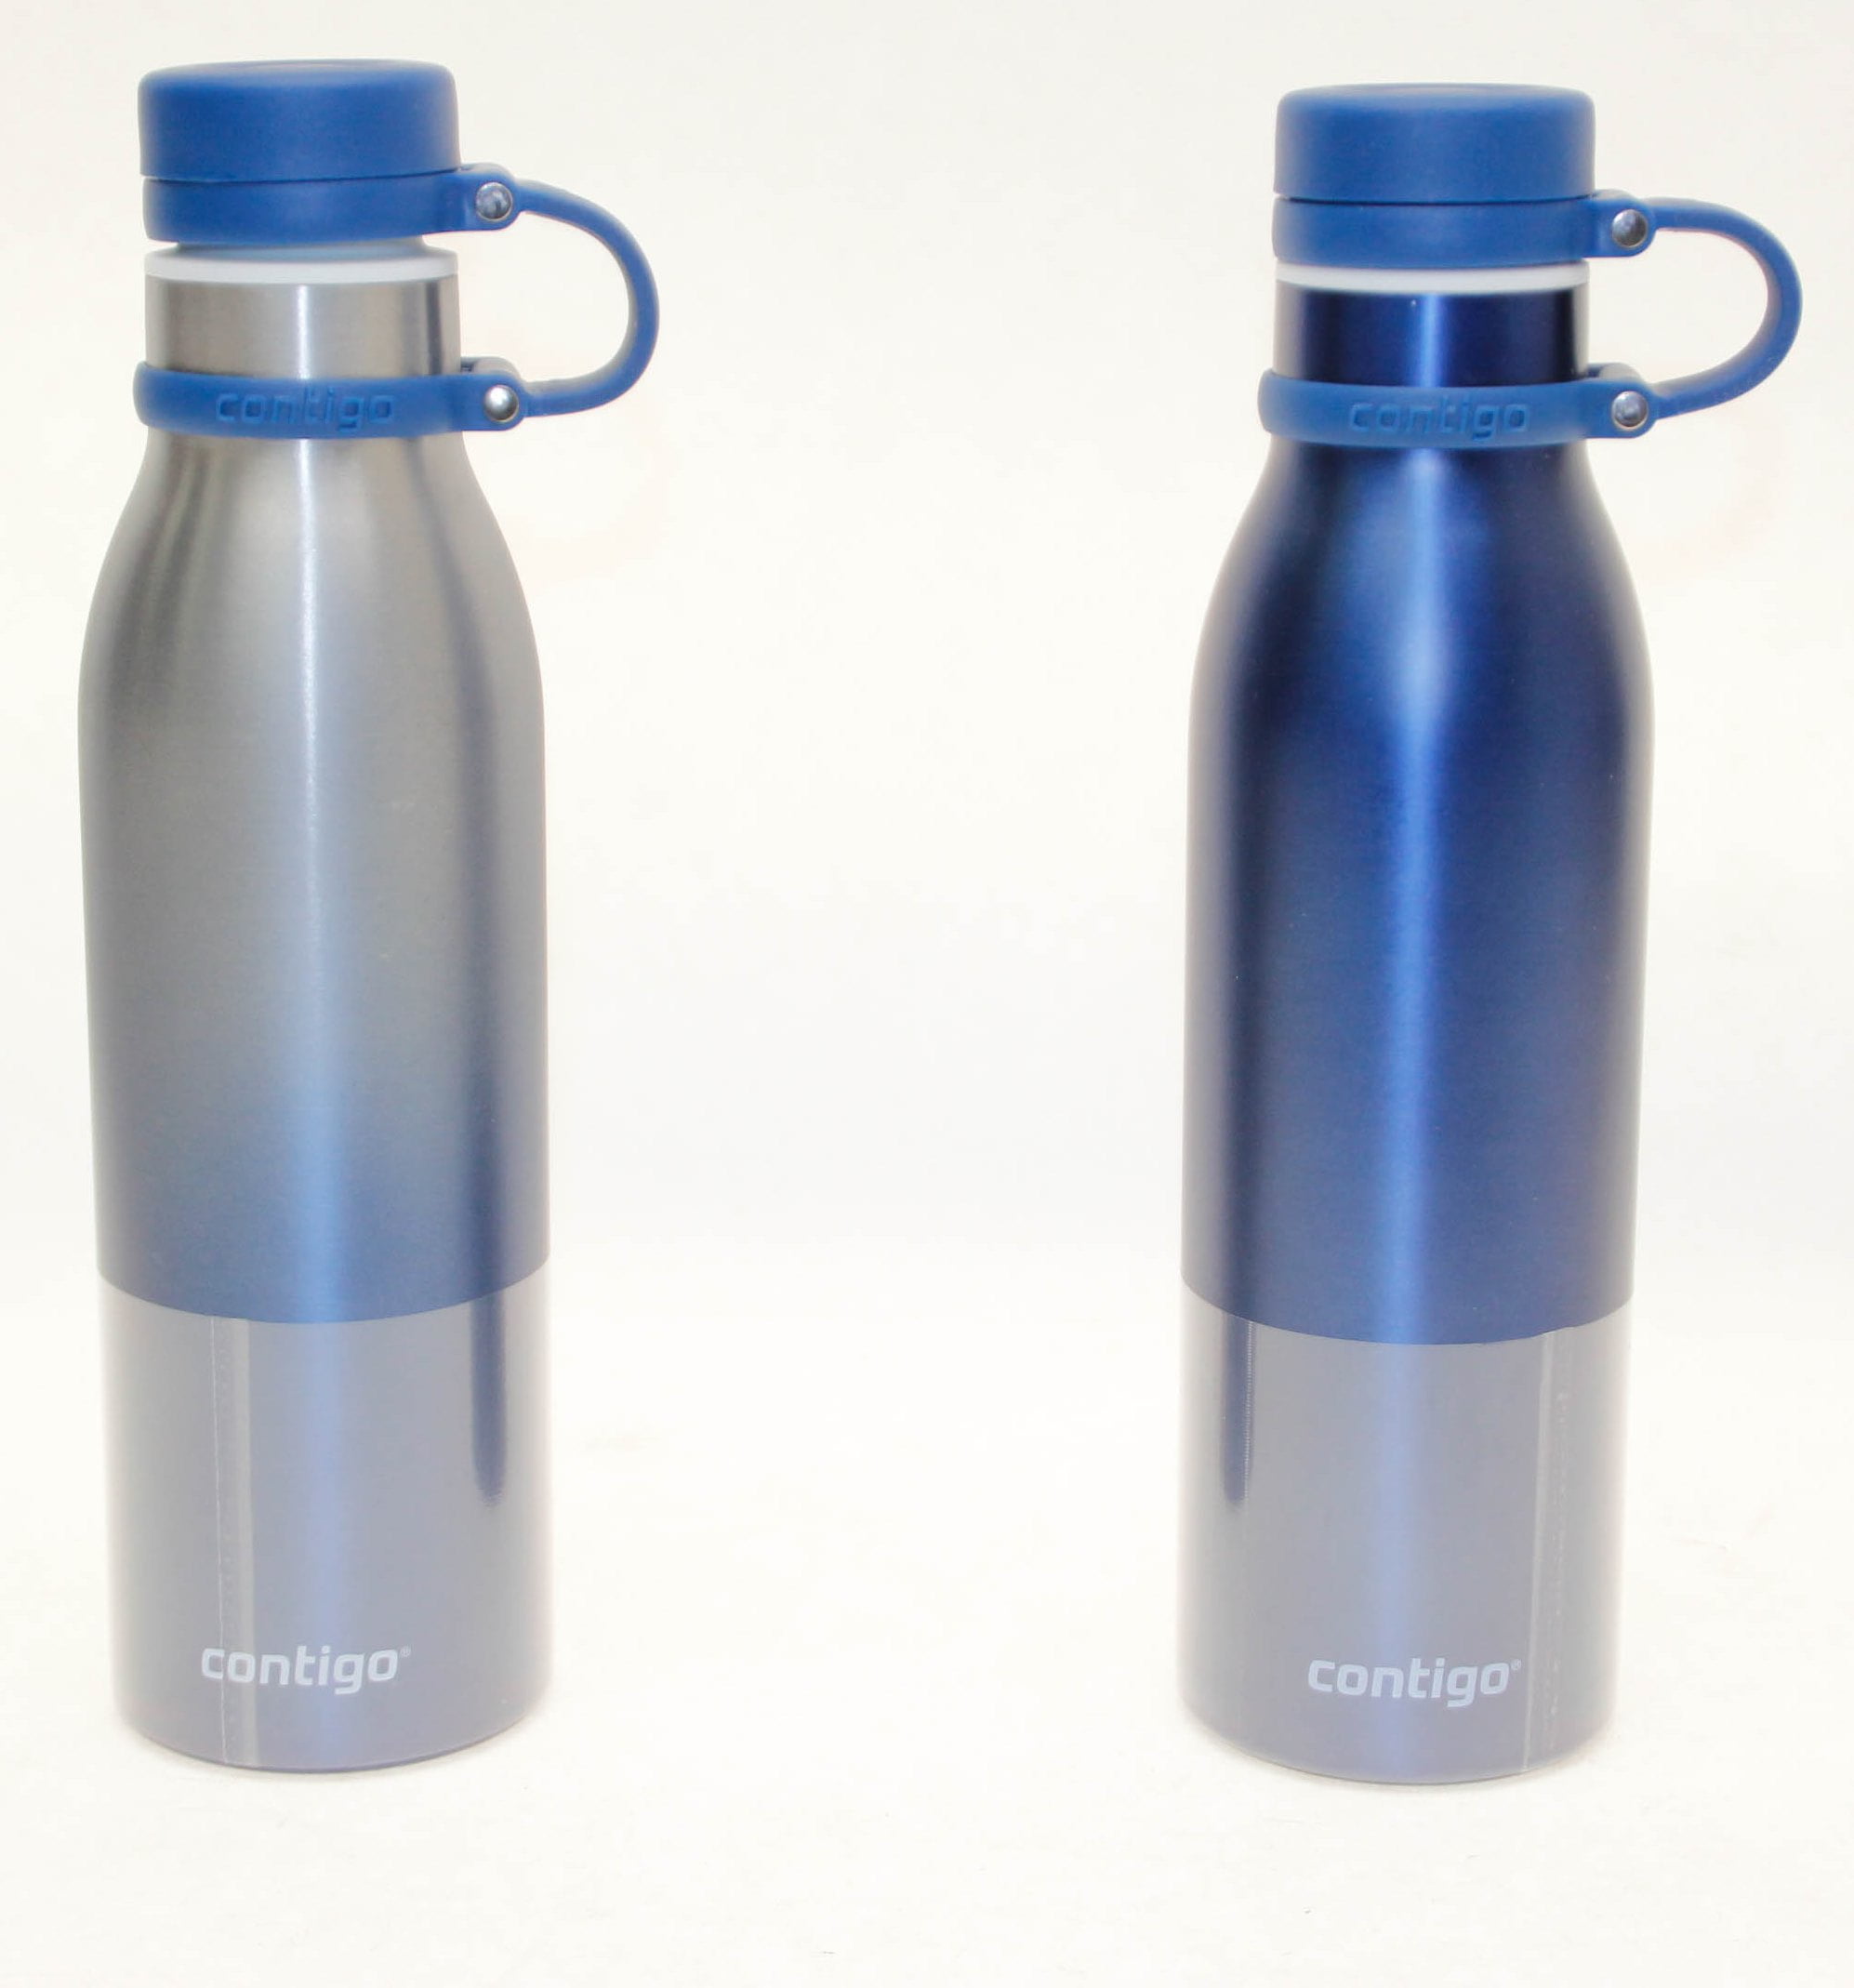 Contigo Autoseal Couture 20oz Vacuum Insulated Stainless Steel Water Bottle 2 PK for sale online 